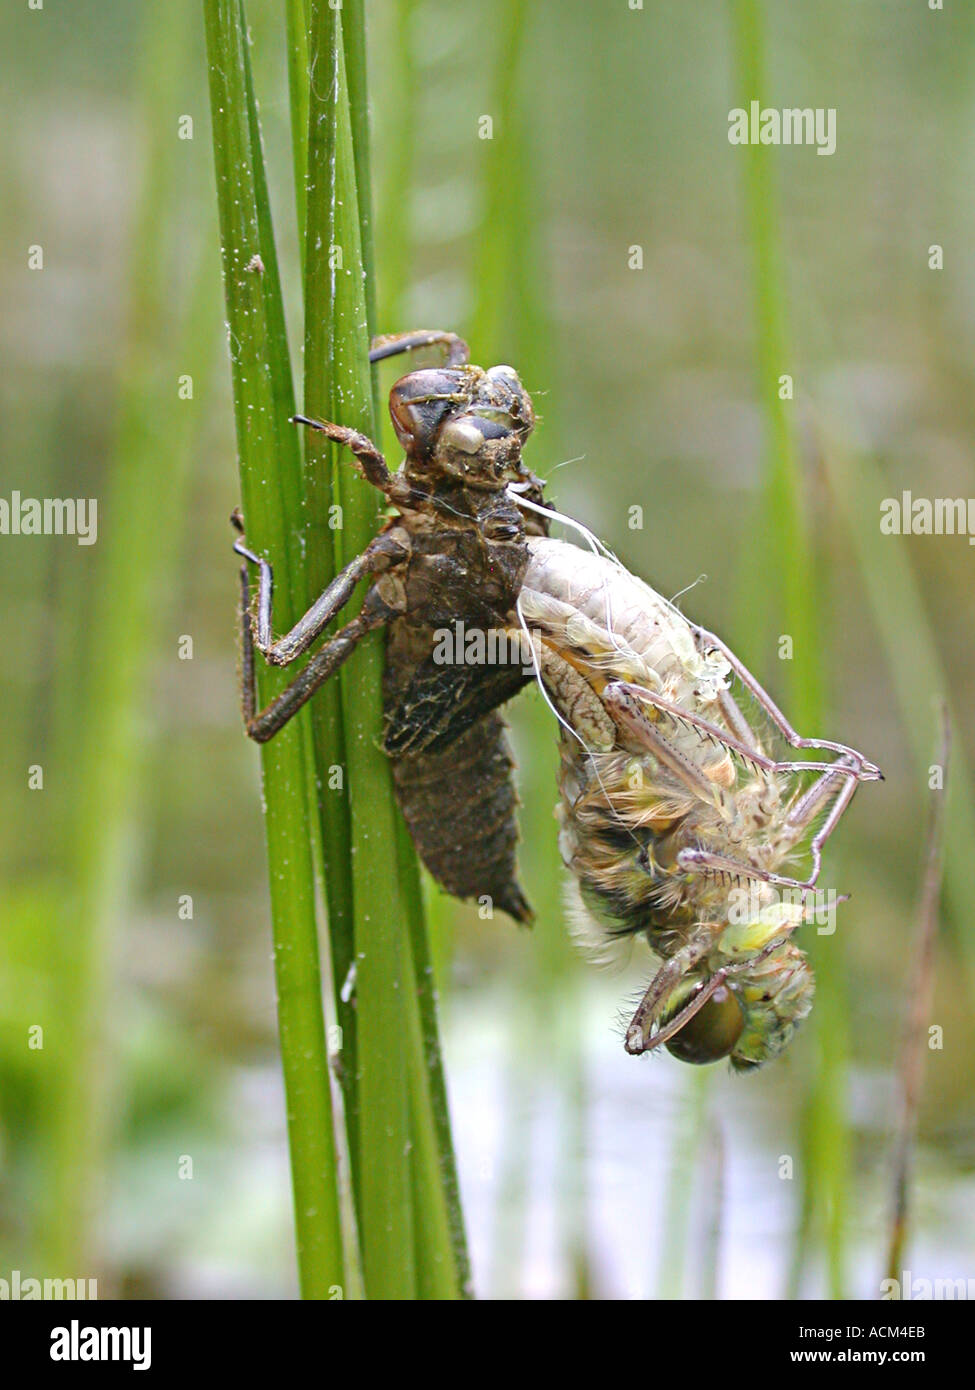 The birth of a dragonfly Aeschna cyanea Stock Photo